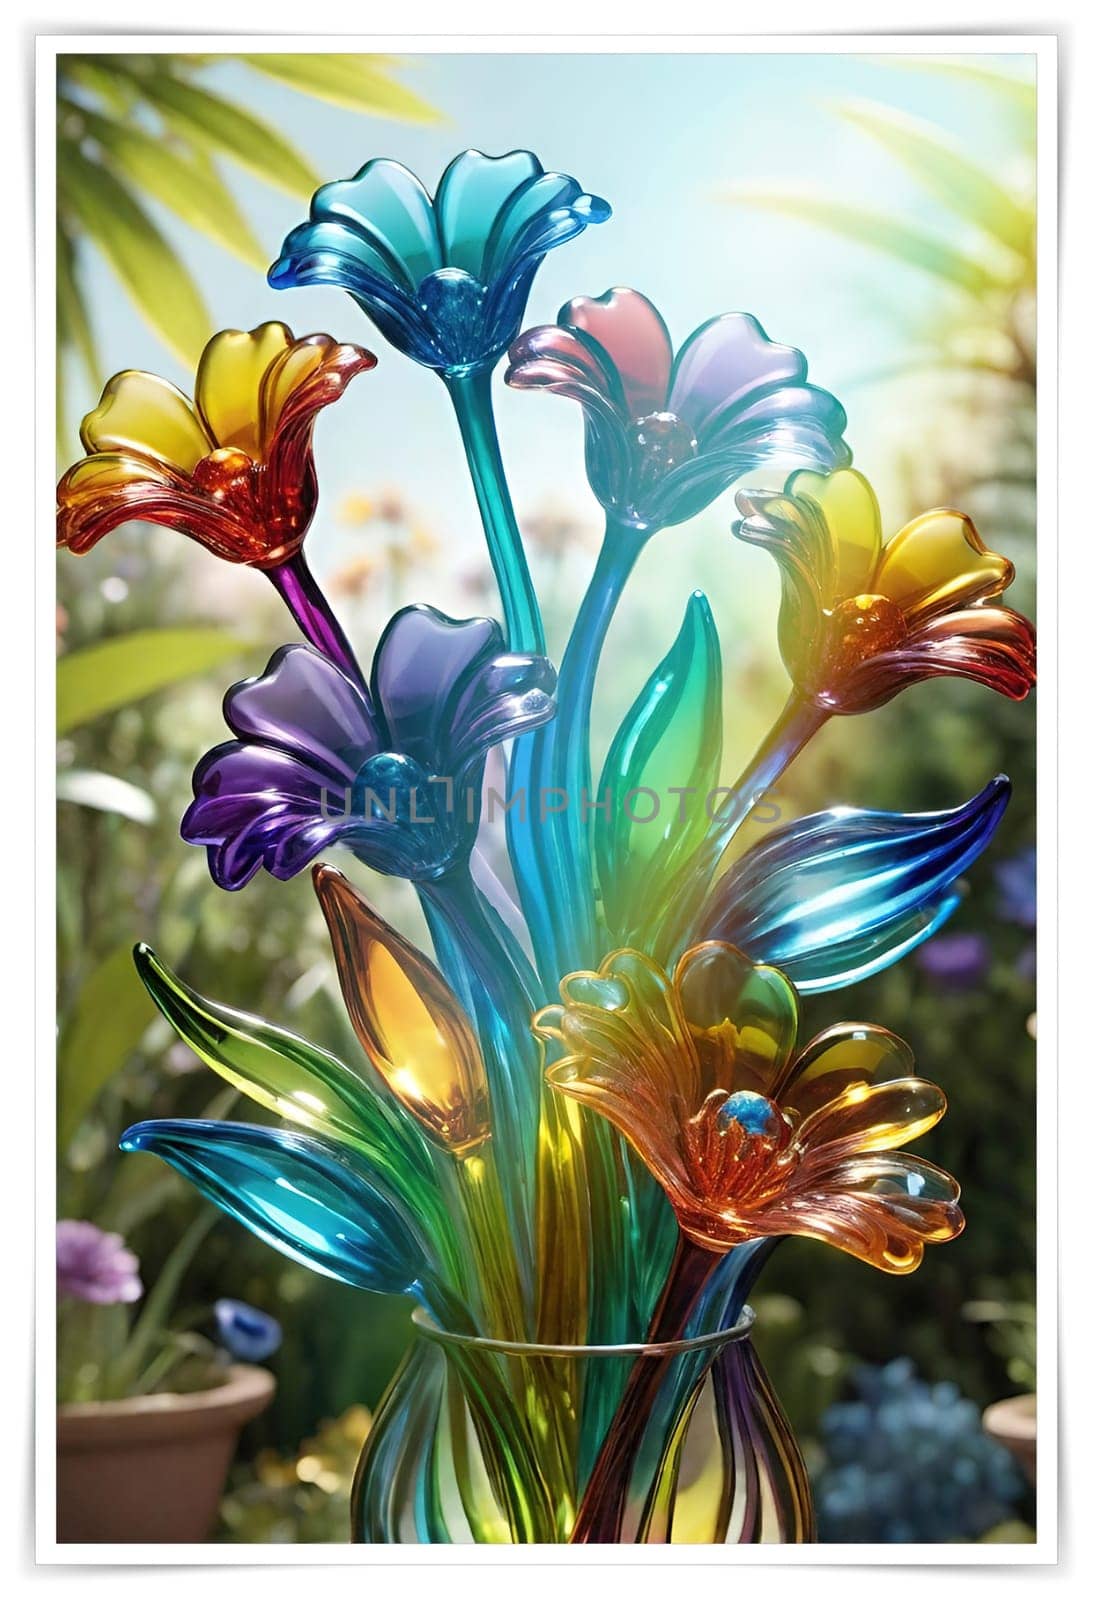 Colorful glass flower on a multicolored background. by yilmazsavaskandag